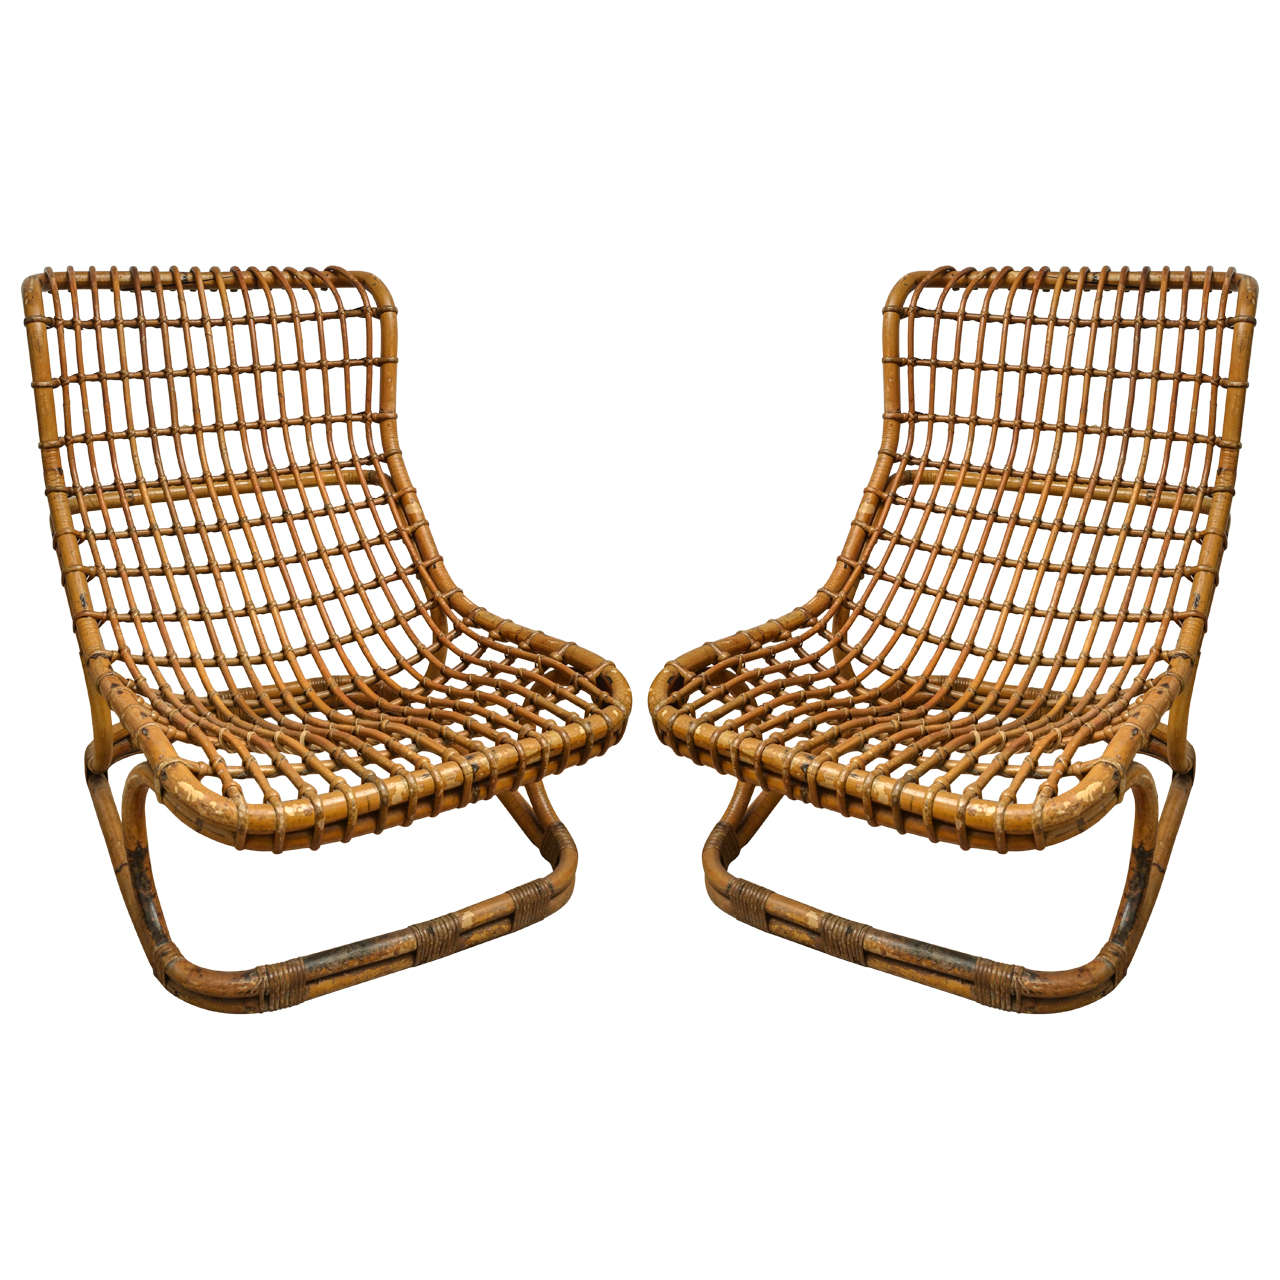 Pair of Rattan Lounge Chairs by Tito Agnoli